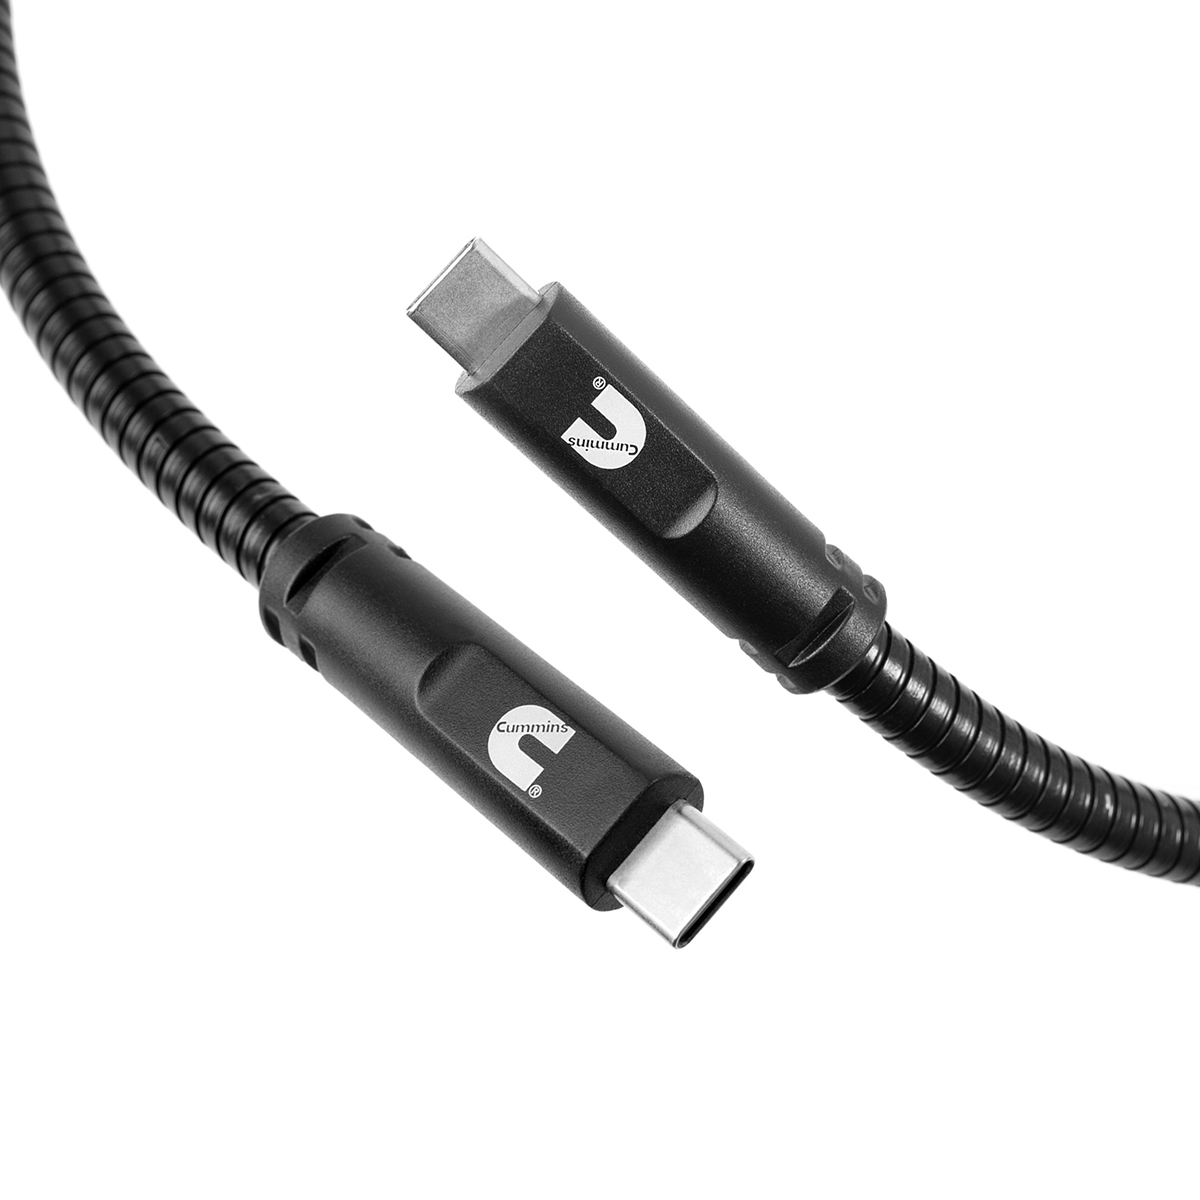 Cummins USB-C to C Cable for Android Devices CMN4703